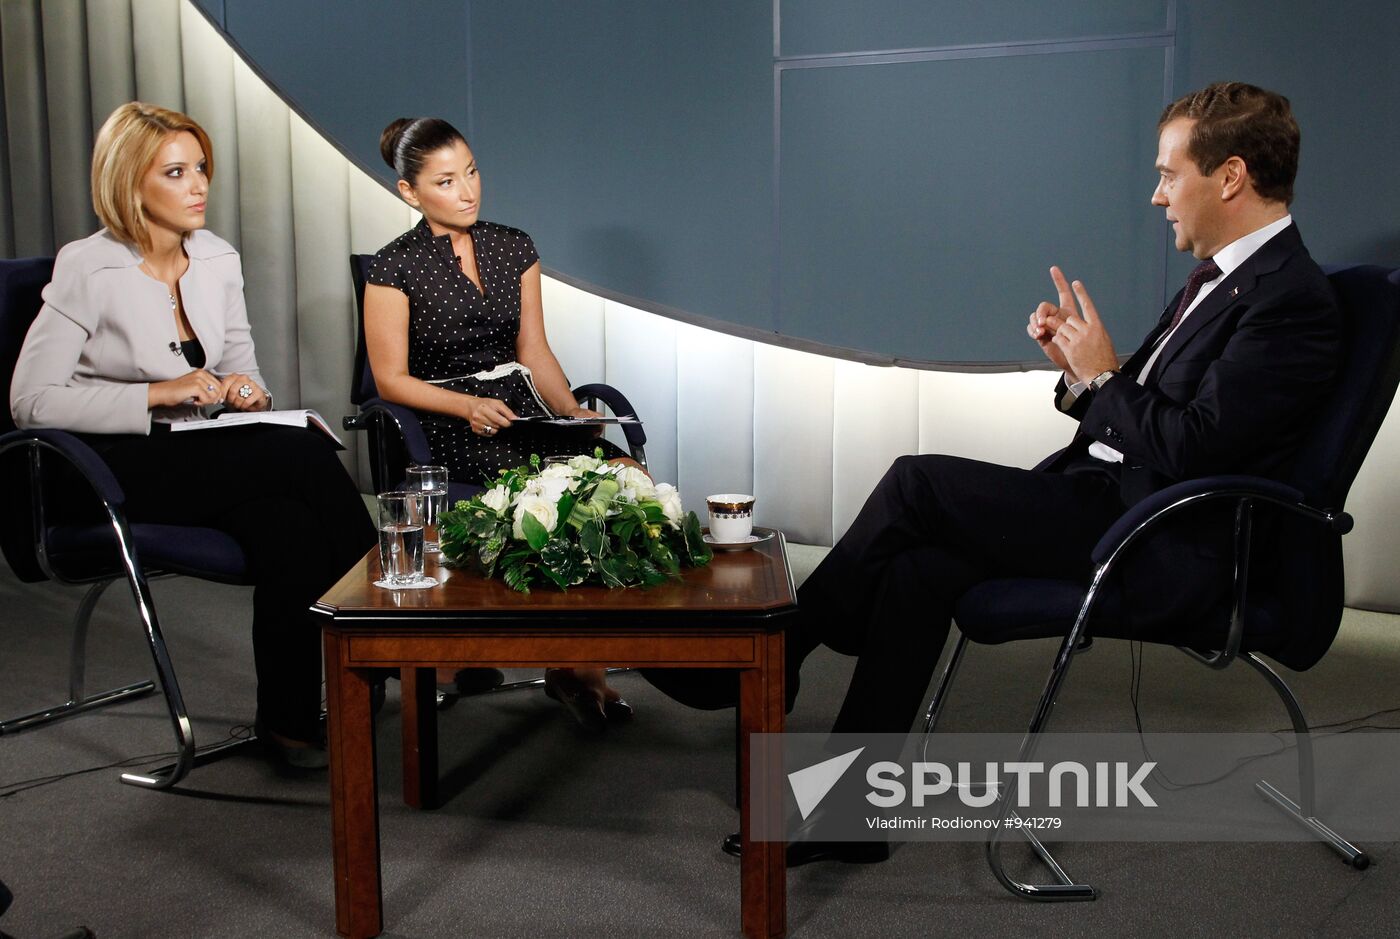 Russia’s President Dmitry Medvedev granted an interview to TV channels and a radio station